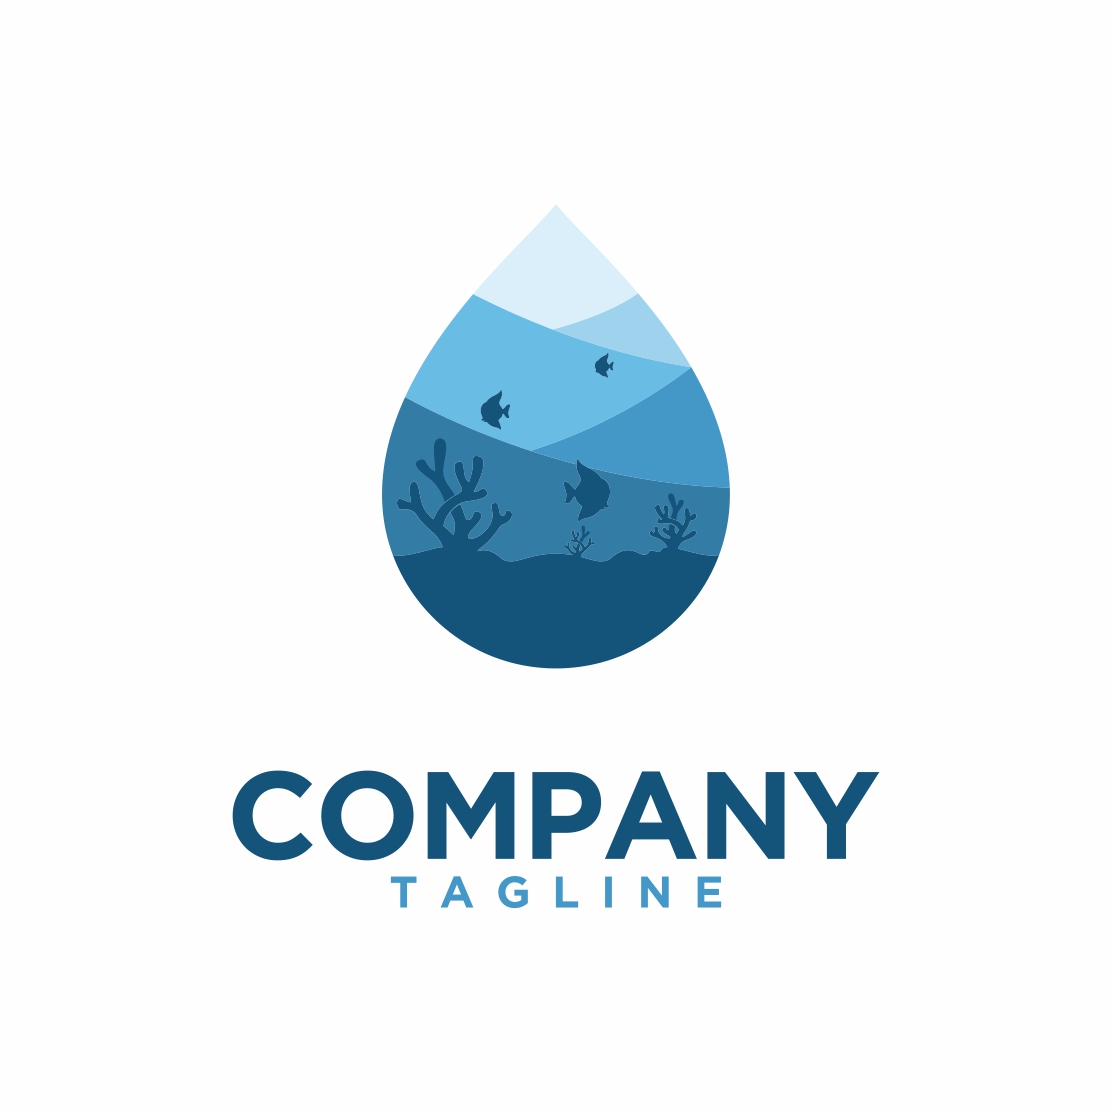 Coral reef tourism logo design template, water tourism logo - only 7$ cover image.